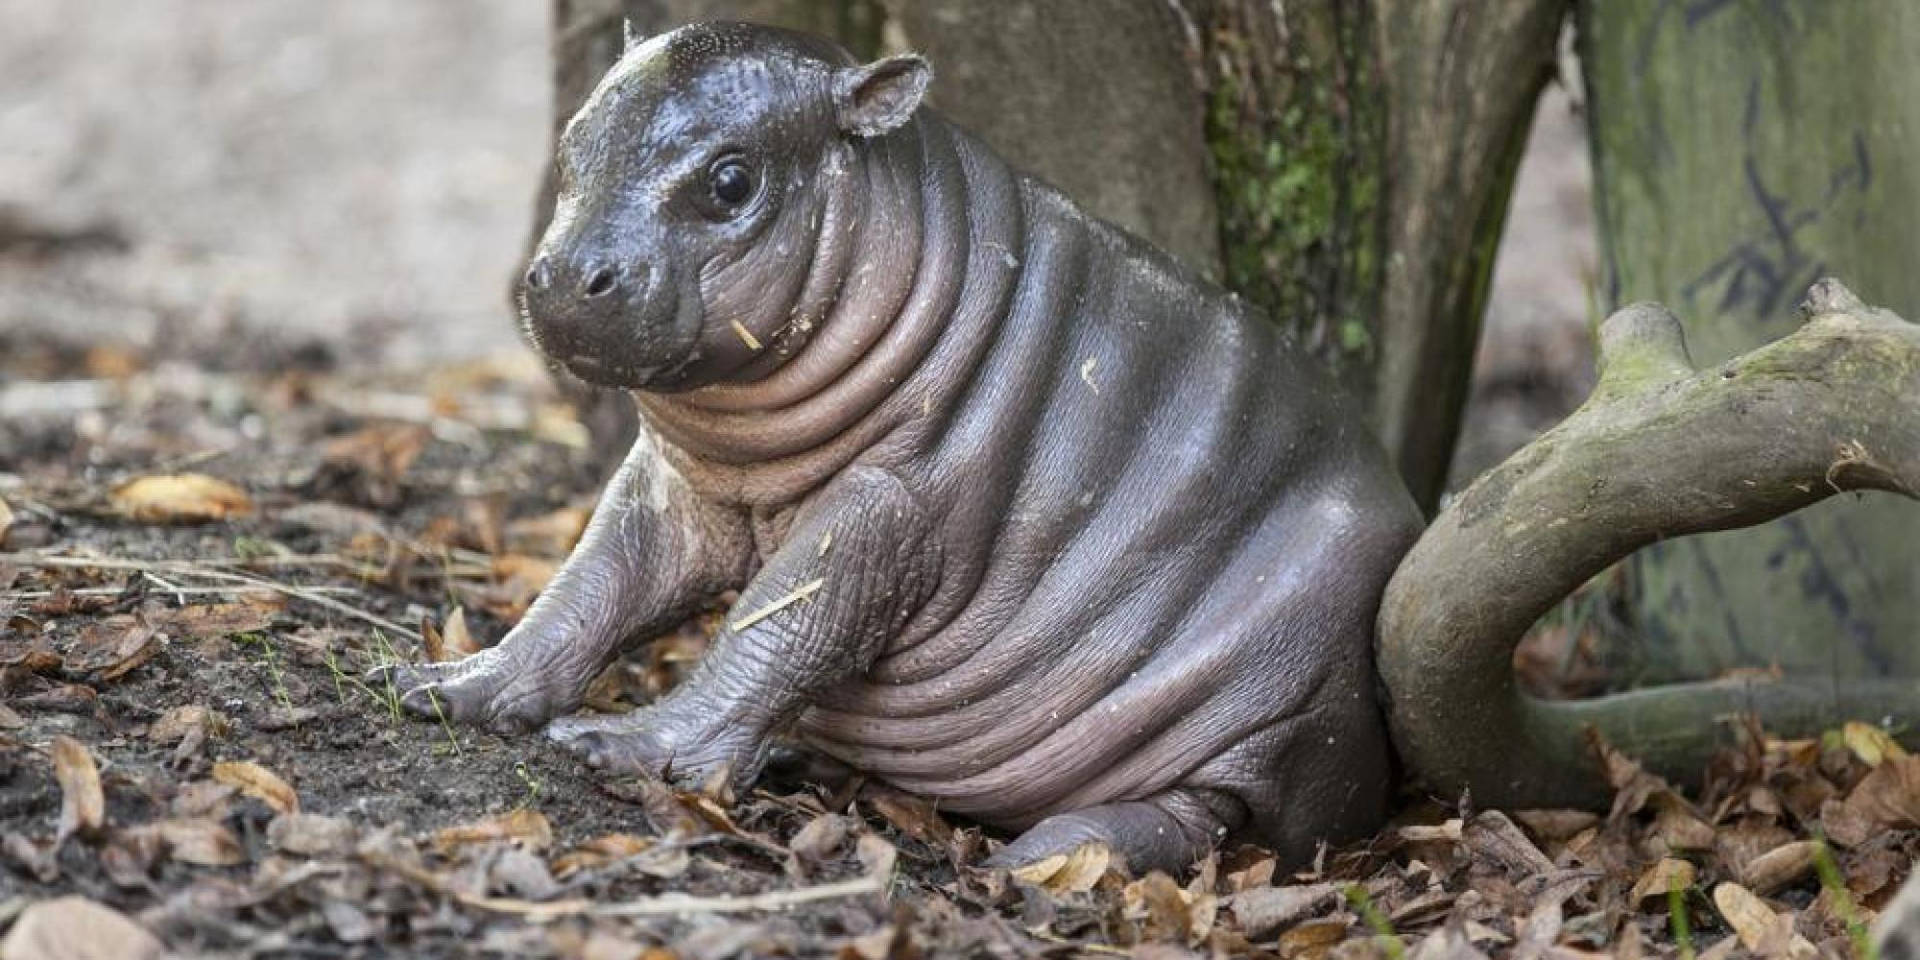 Pygmy Hippopotamus With Dried Leaves